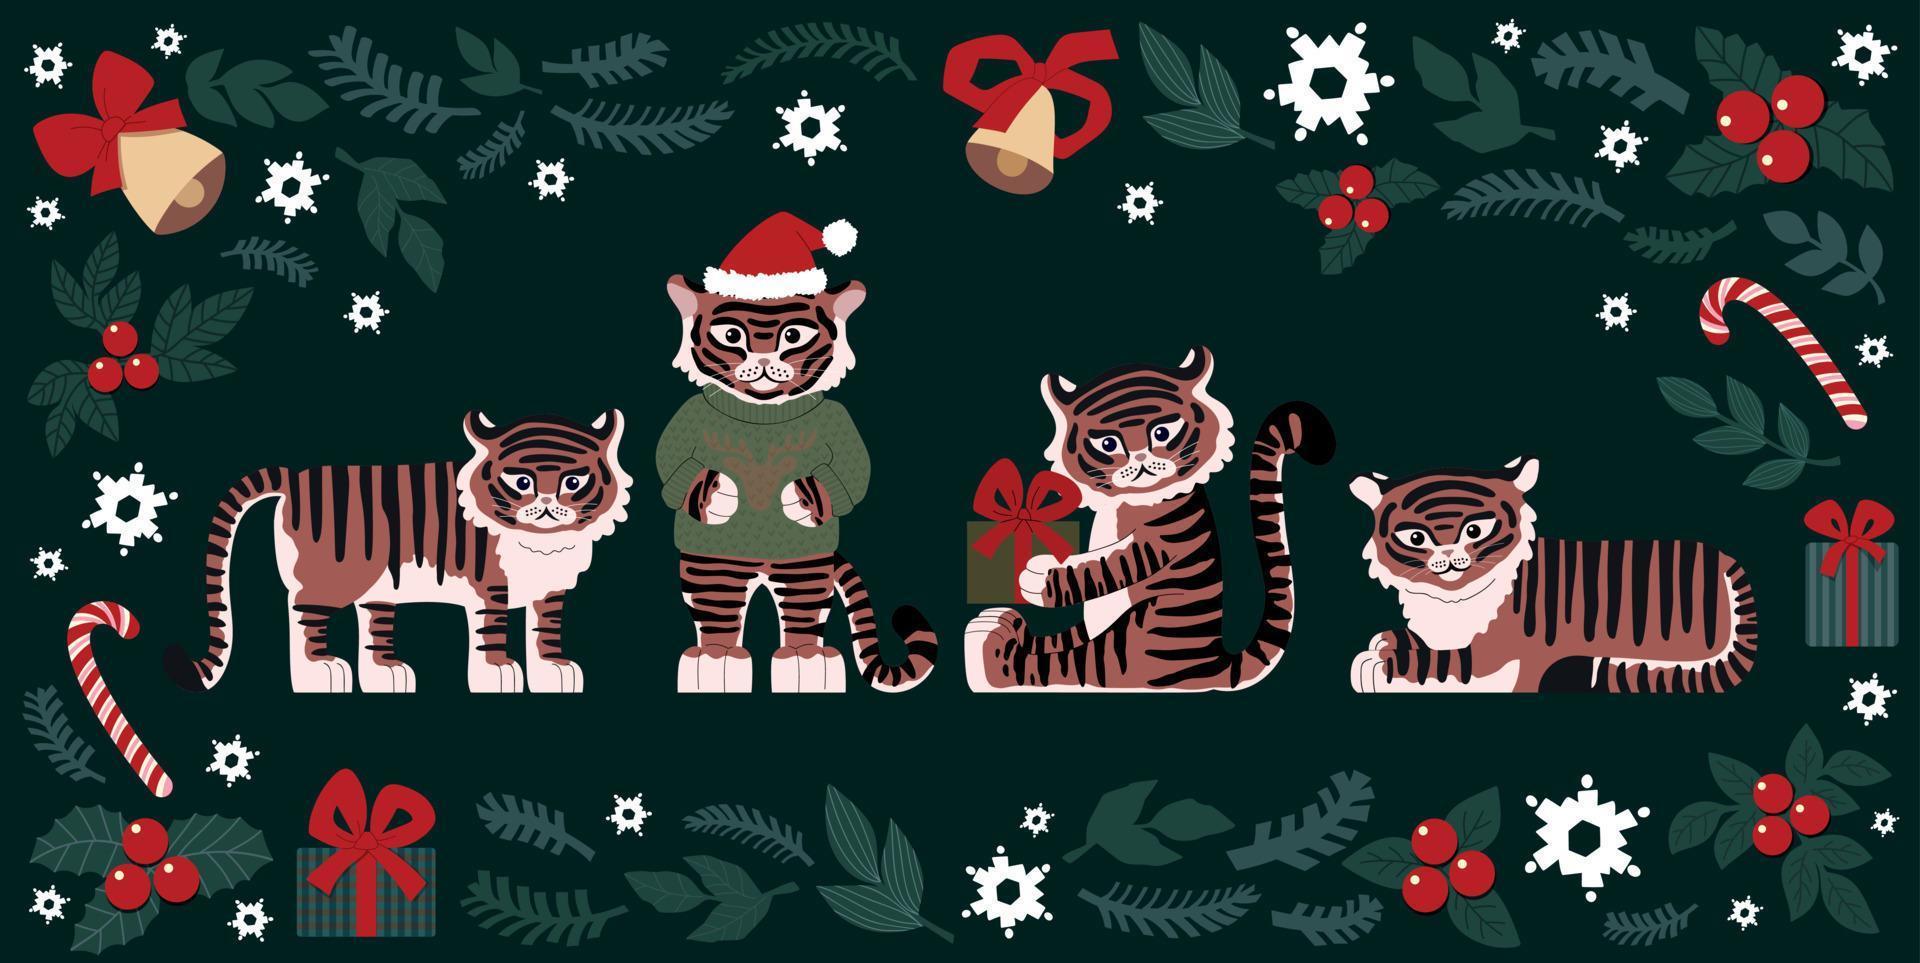 cute drawn tigers and christmas elements - fir branches, bells, lollipops, mistletoe, gifts, snowflakes, leaves. vector large set of objects isolated. year of the tiger 2022. for magnets or cards